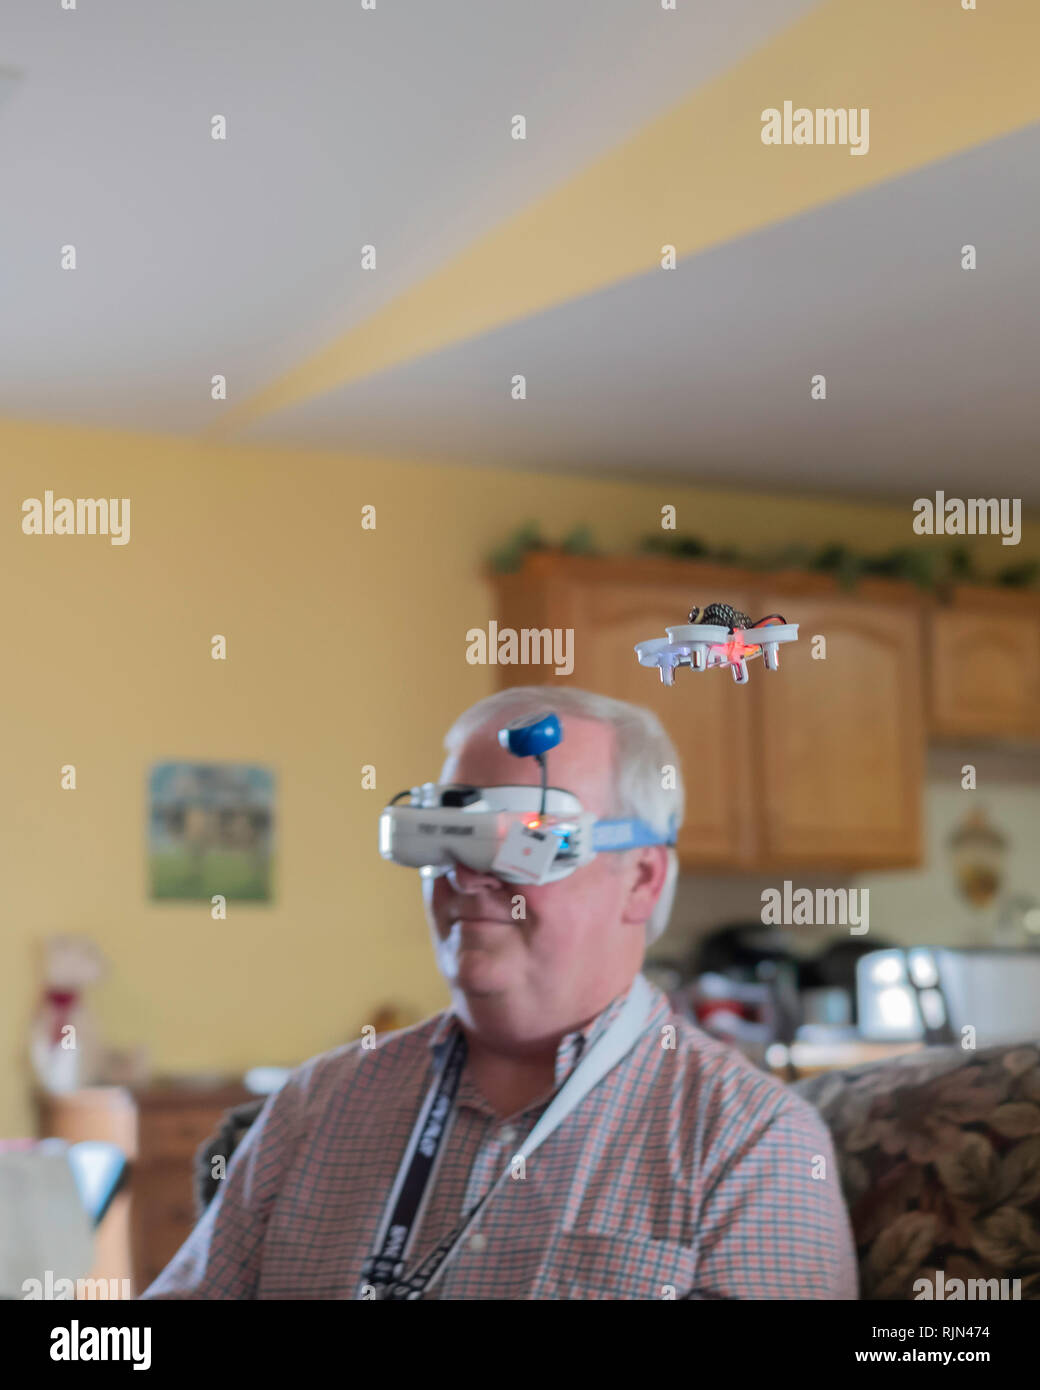 Fat Shark drone goggles worn by a 55 year old Caucasian man to visualize his small EACHINE E10 mini UFO quadcopter drone flying inside a home. USA. Stock Photo